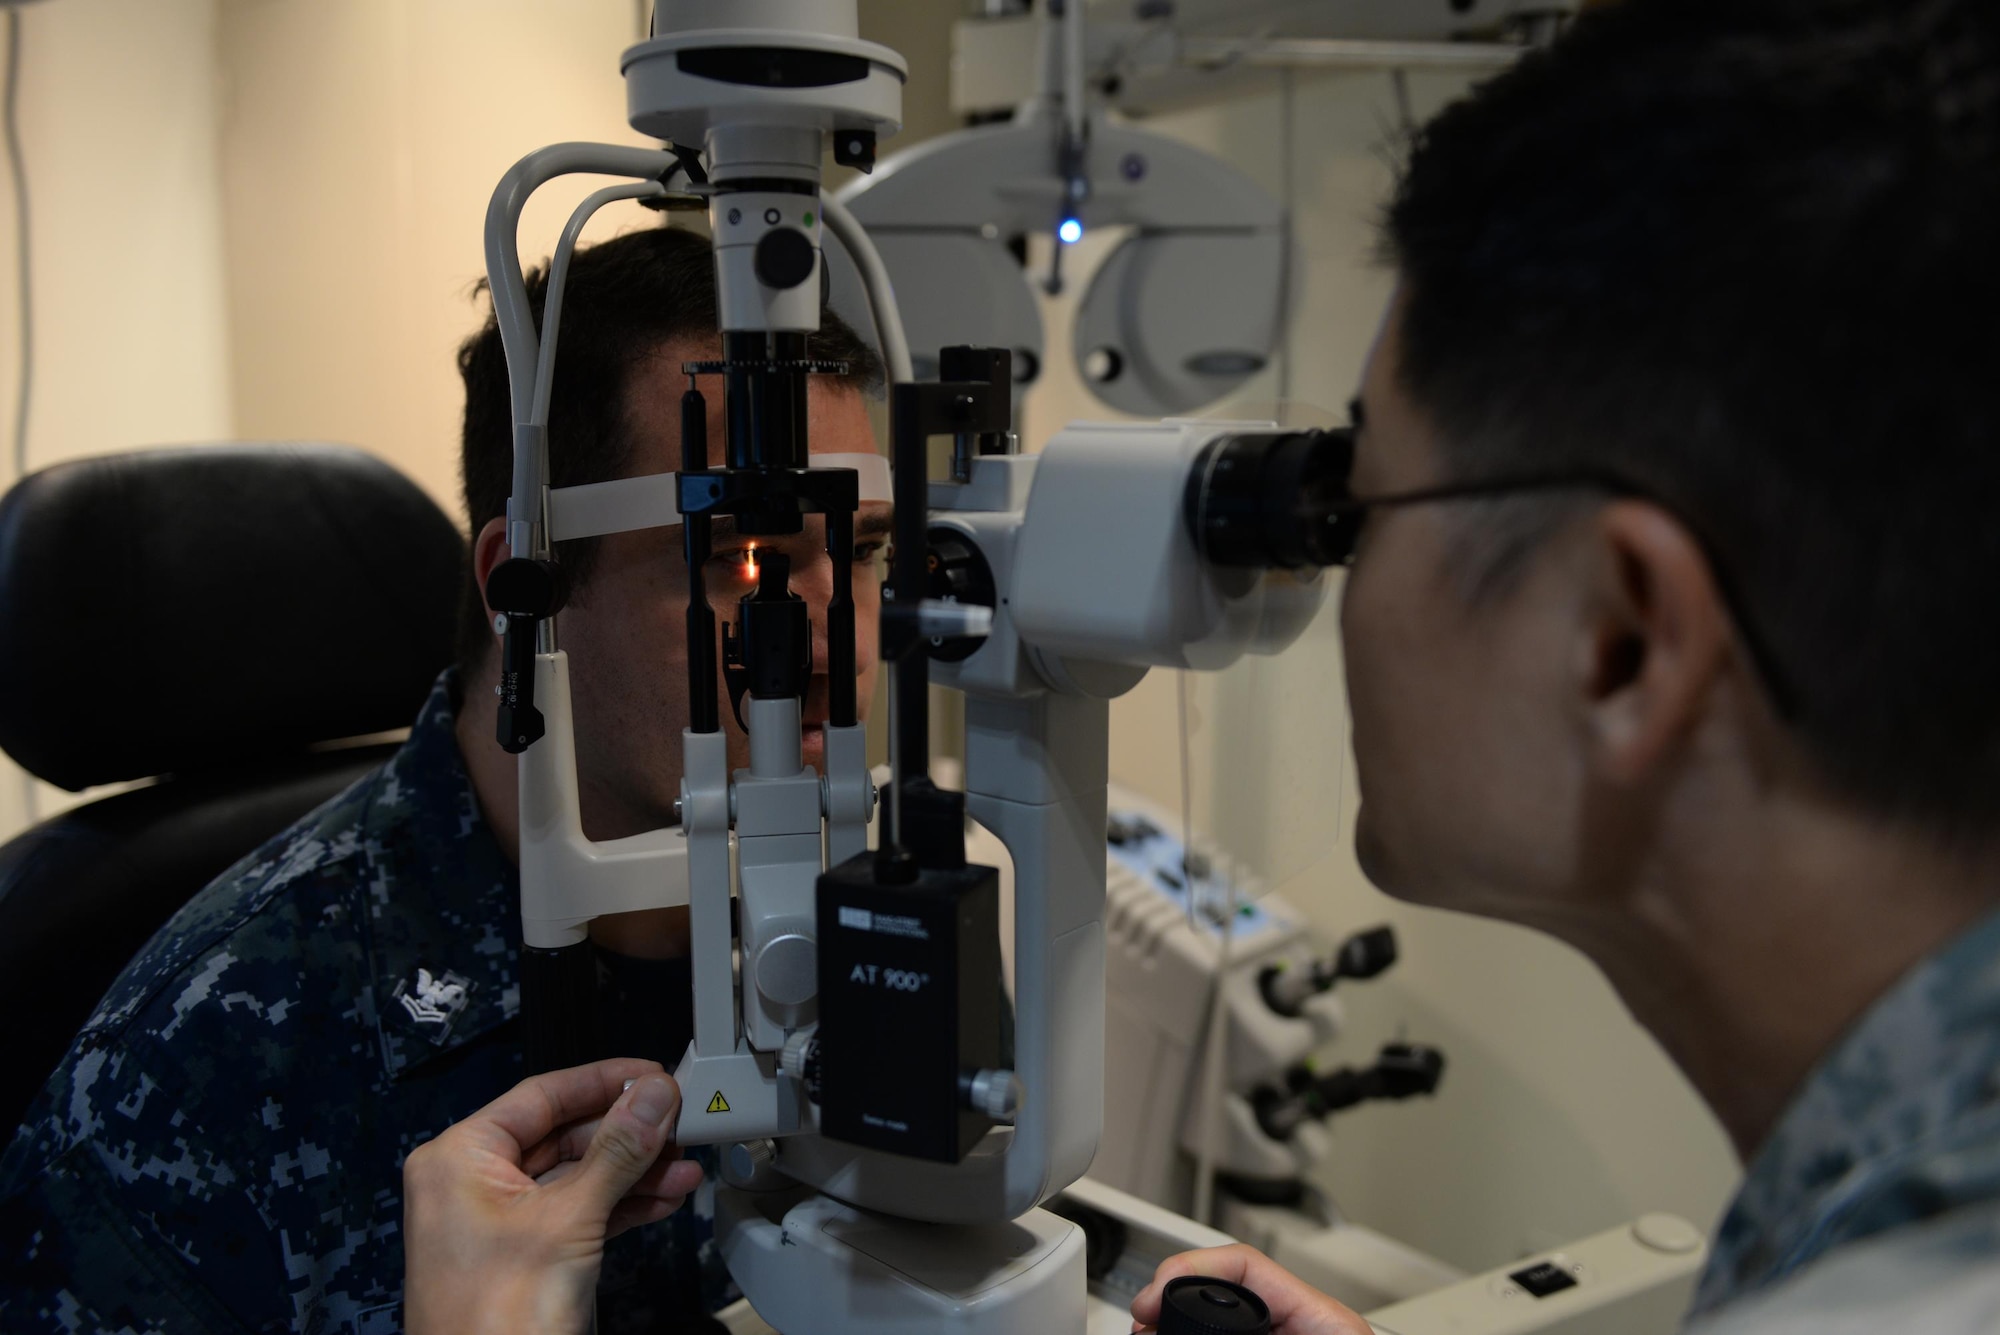 Maj. John Kim, 36th Medical Operations Squadron chief of optometry services, inspects the eye of Petty Officer 2nd Class Chris Rumbaua, Fleet Air Forward Detachment Aircraft Intermediate Maintenance Department life support technician, Jan. 27, 2016, at Andersen Air Force Base, Guam. Kim used a slit lamp, which allows him to closely inspect the eyes by combining a movable light source and magnification. (U.S. Air Force Photo/Airman 1st Class Jacob Skovo)